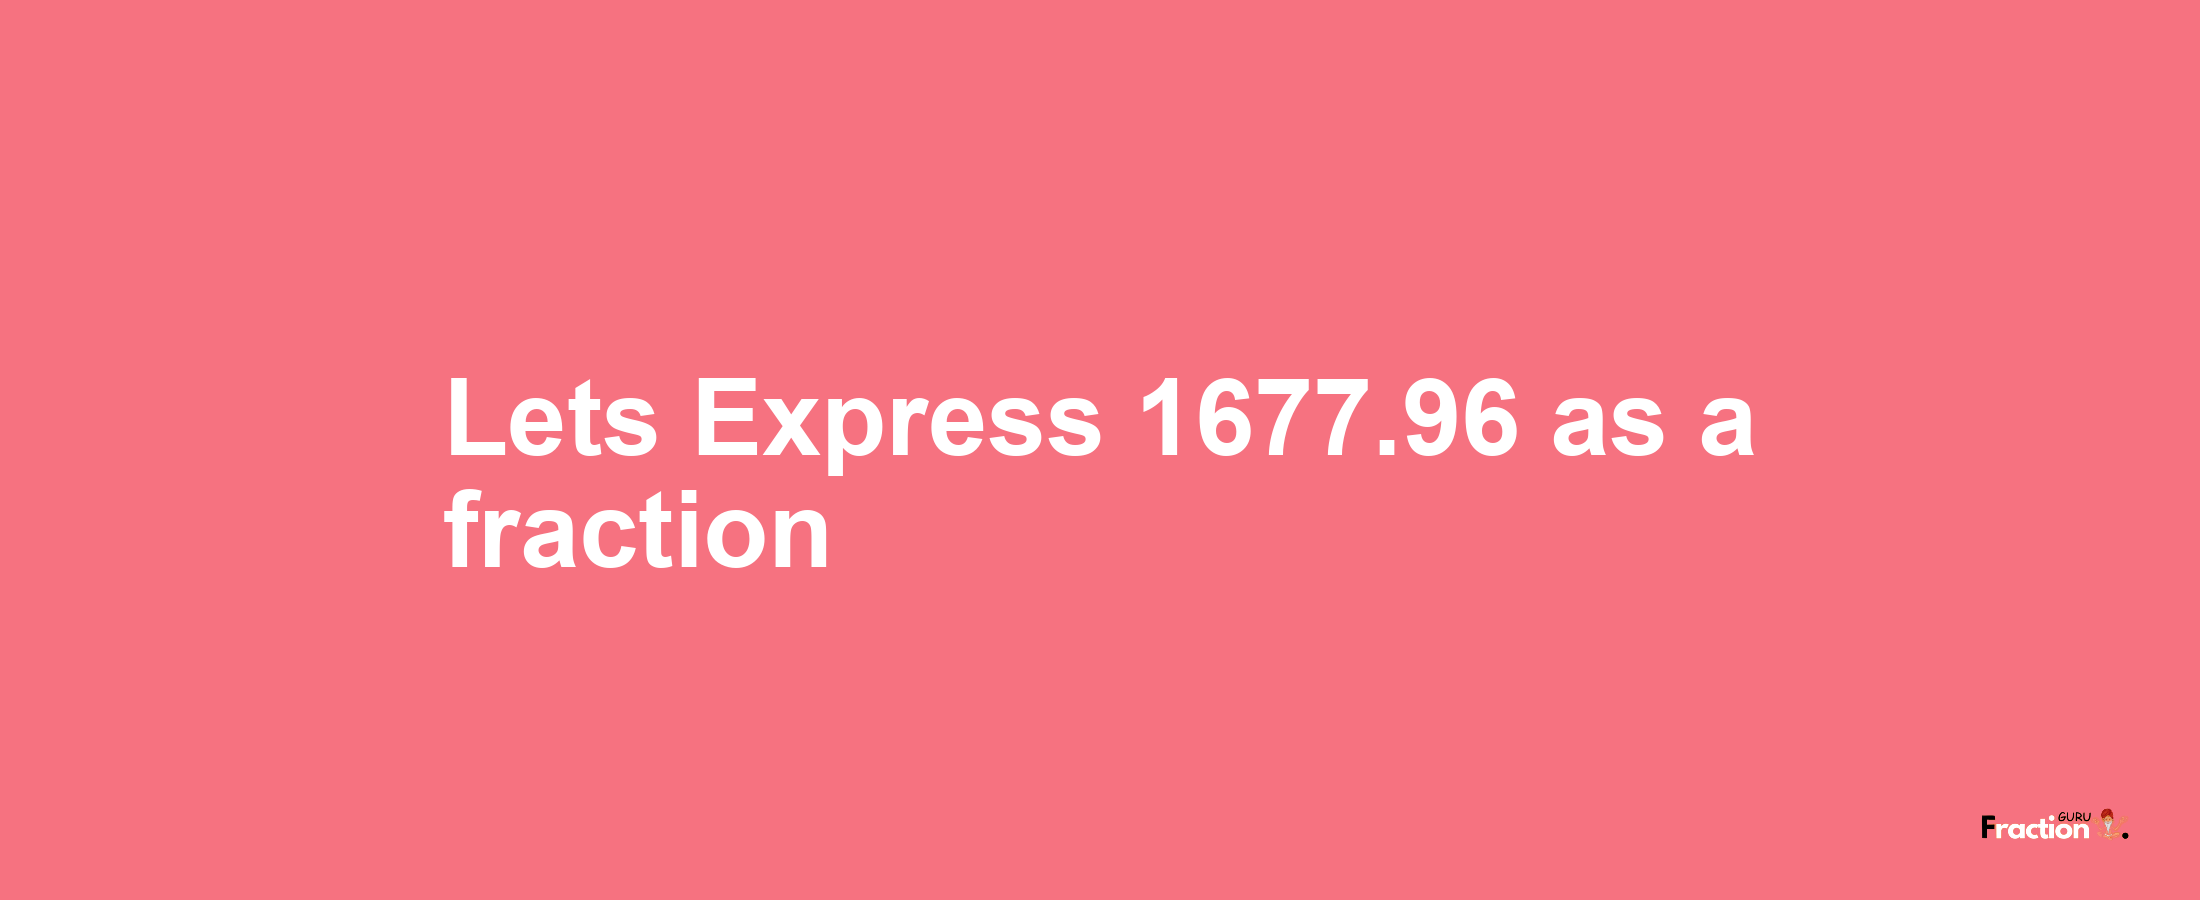 Lets Express 1677.96 as afraction